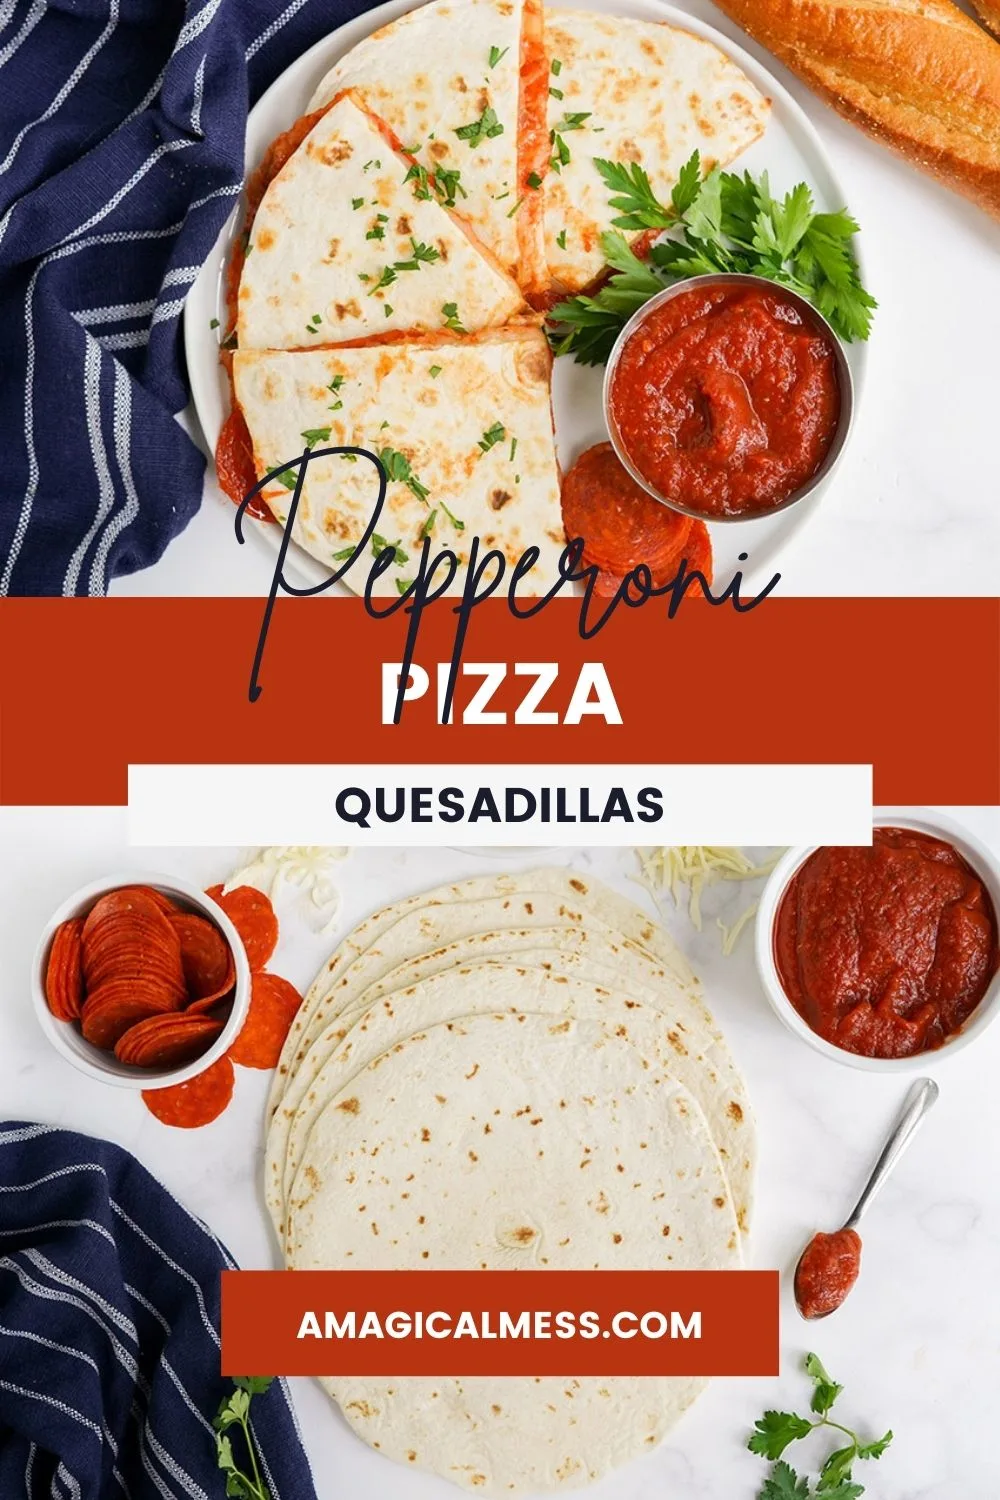 Pizza quesadillas with sauce, tortillas, pepperoni, and garnish on a table.